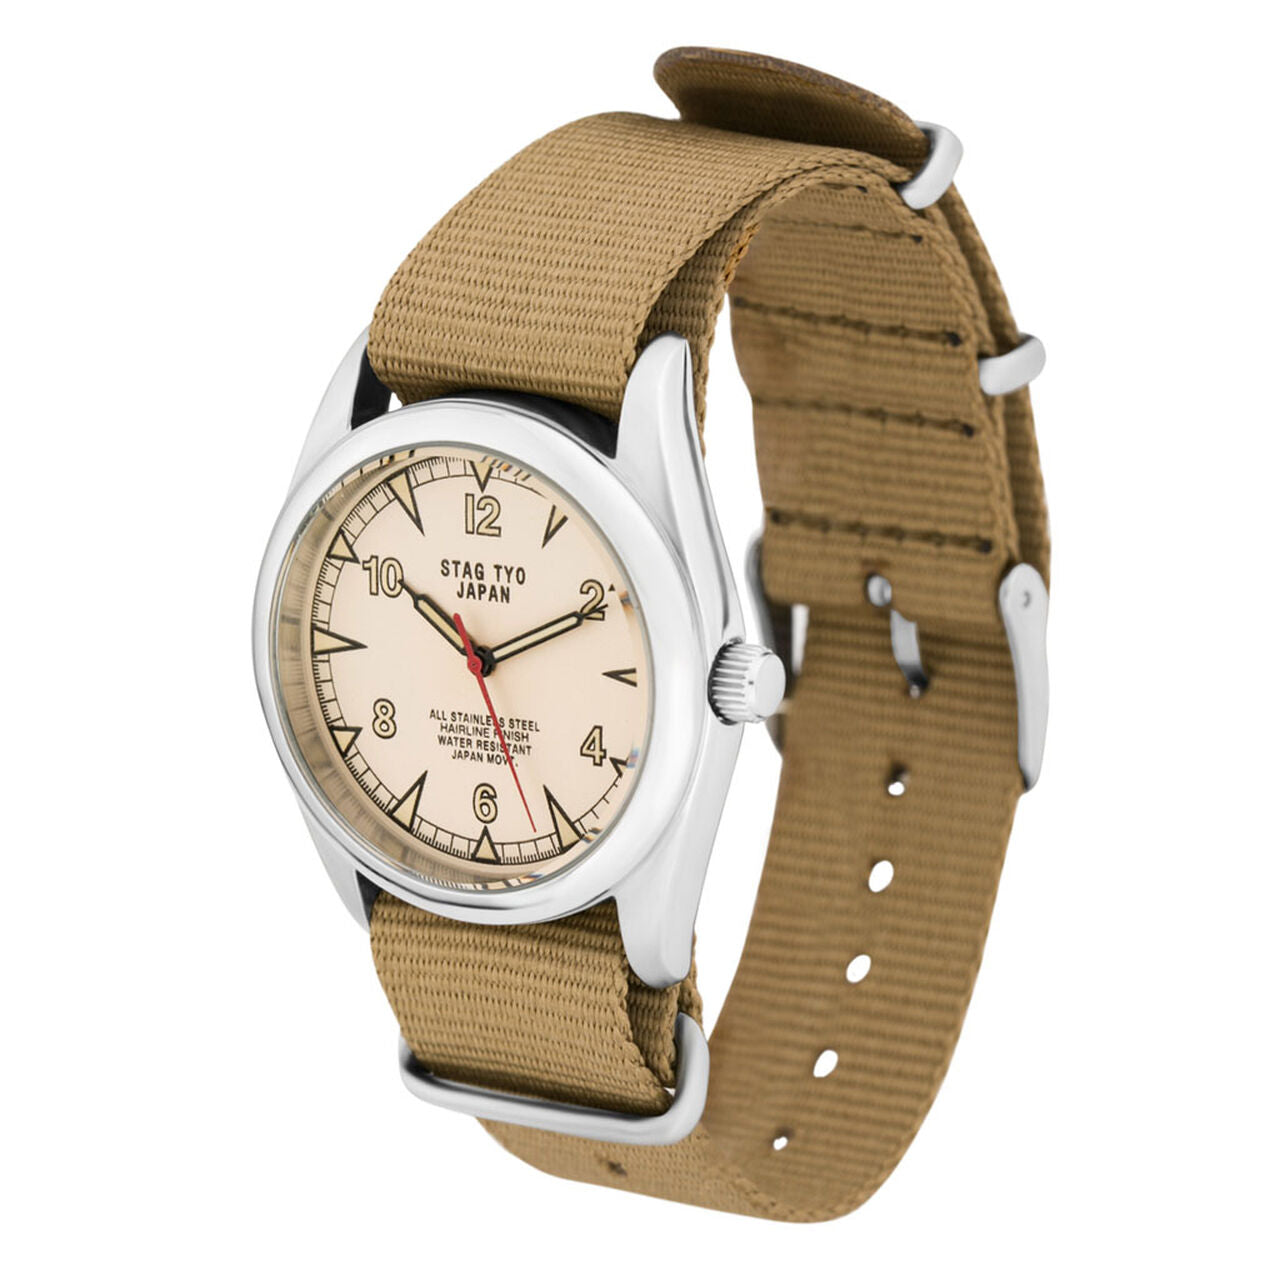 Antique Military Change-Up Watch